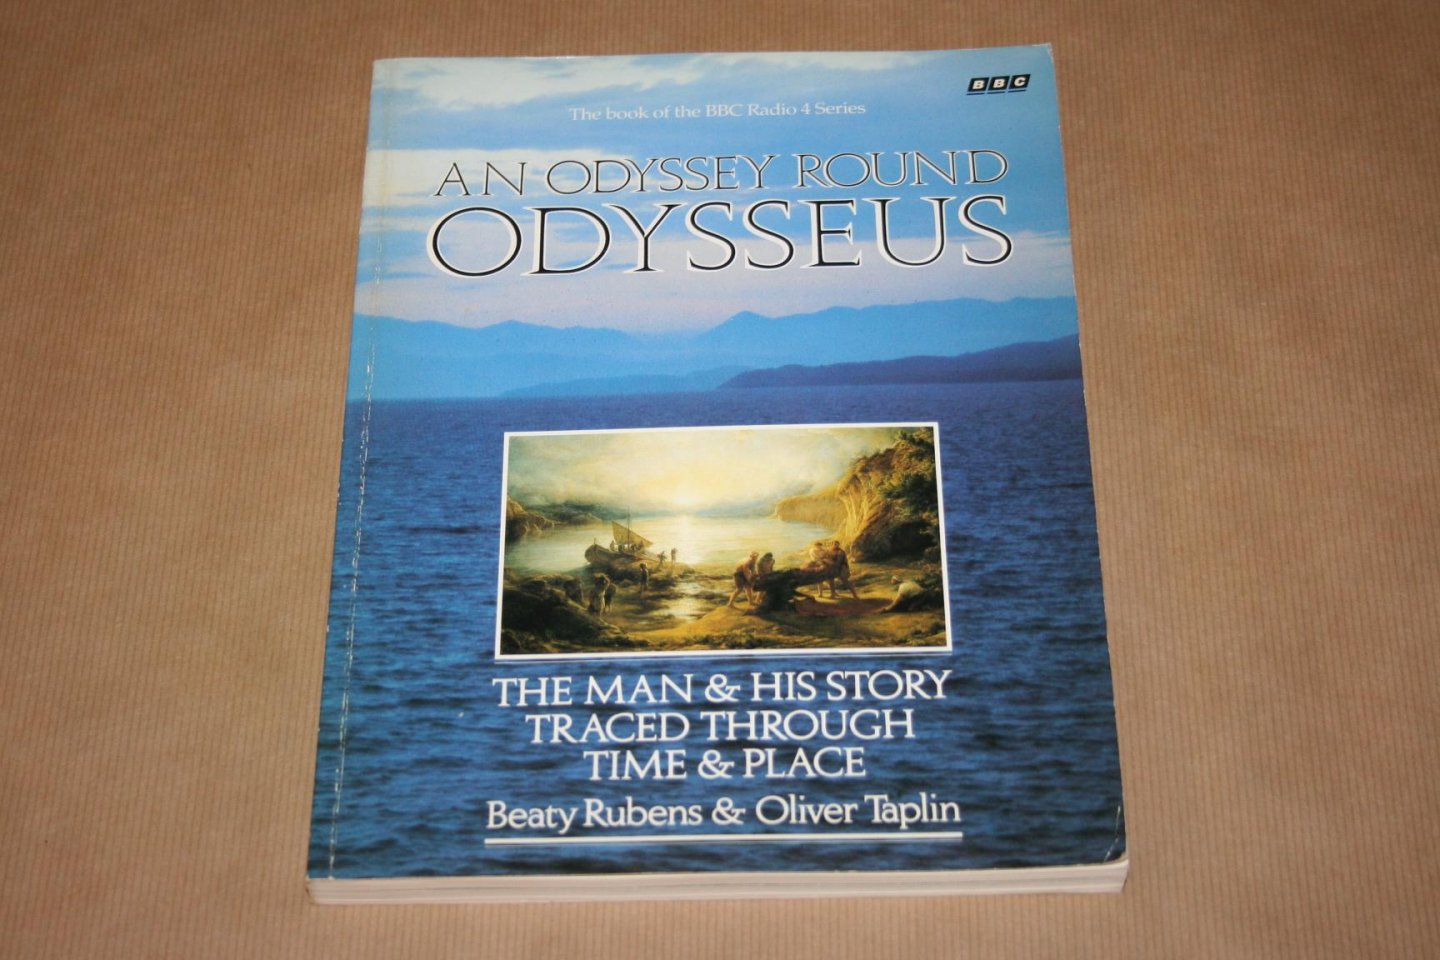 Rubens & Taplin - An Odyssey round Odysseus  -- The man & his history traced through time & place